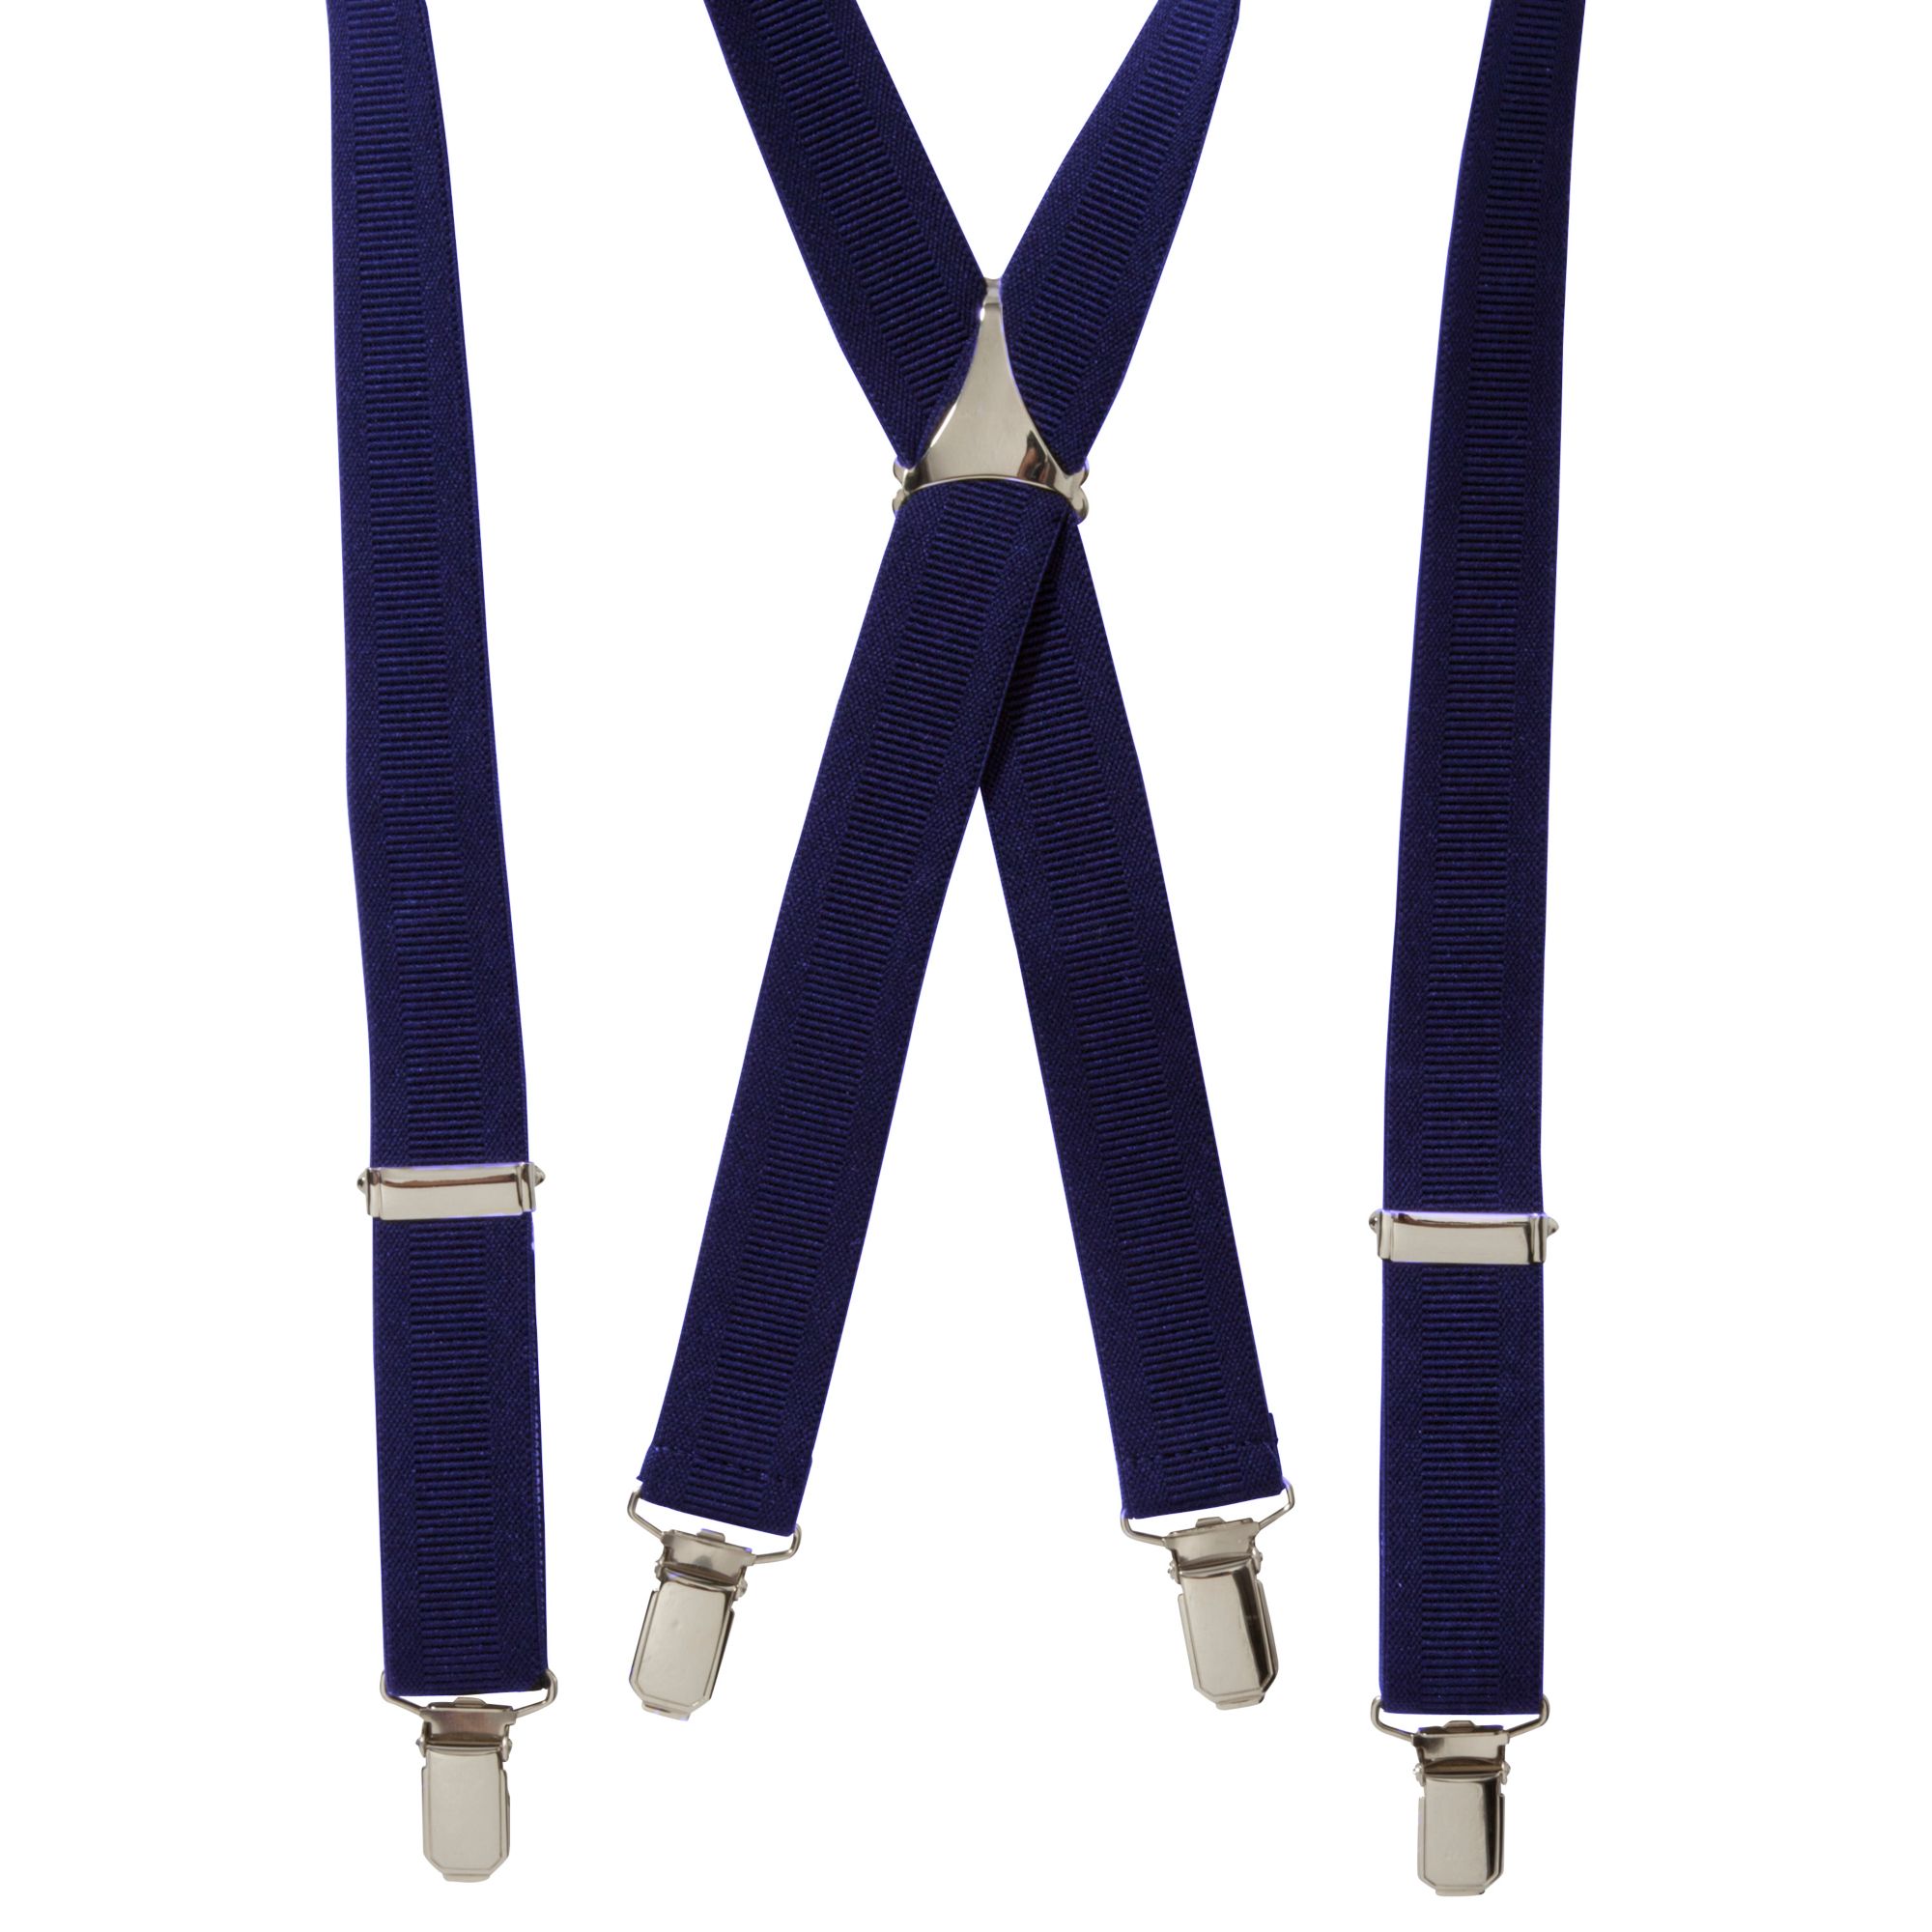 John Lewis Heirloom Collection Boys' Braces, Navy, One Size